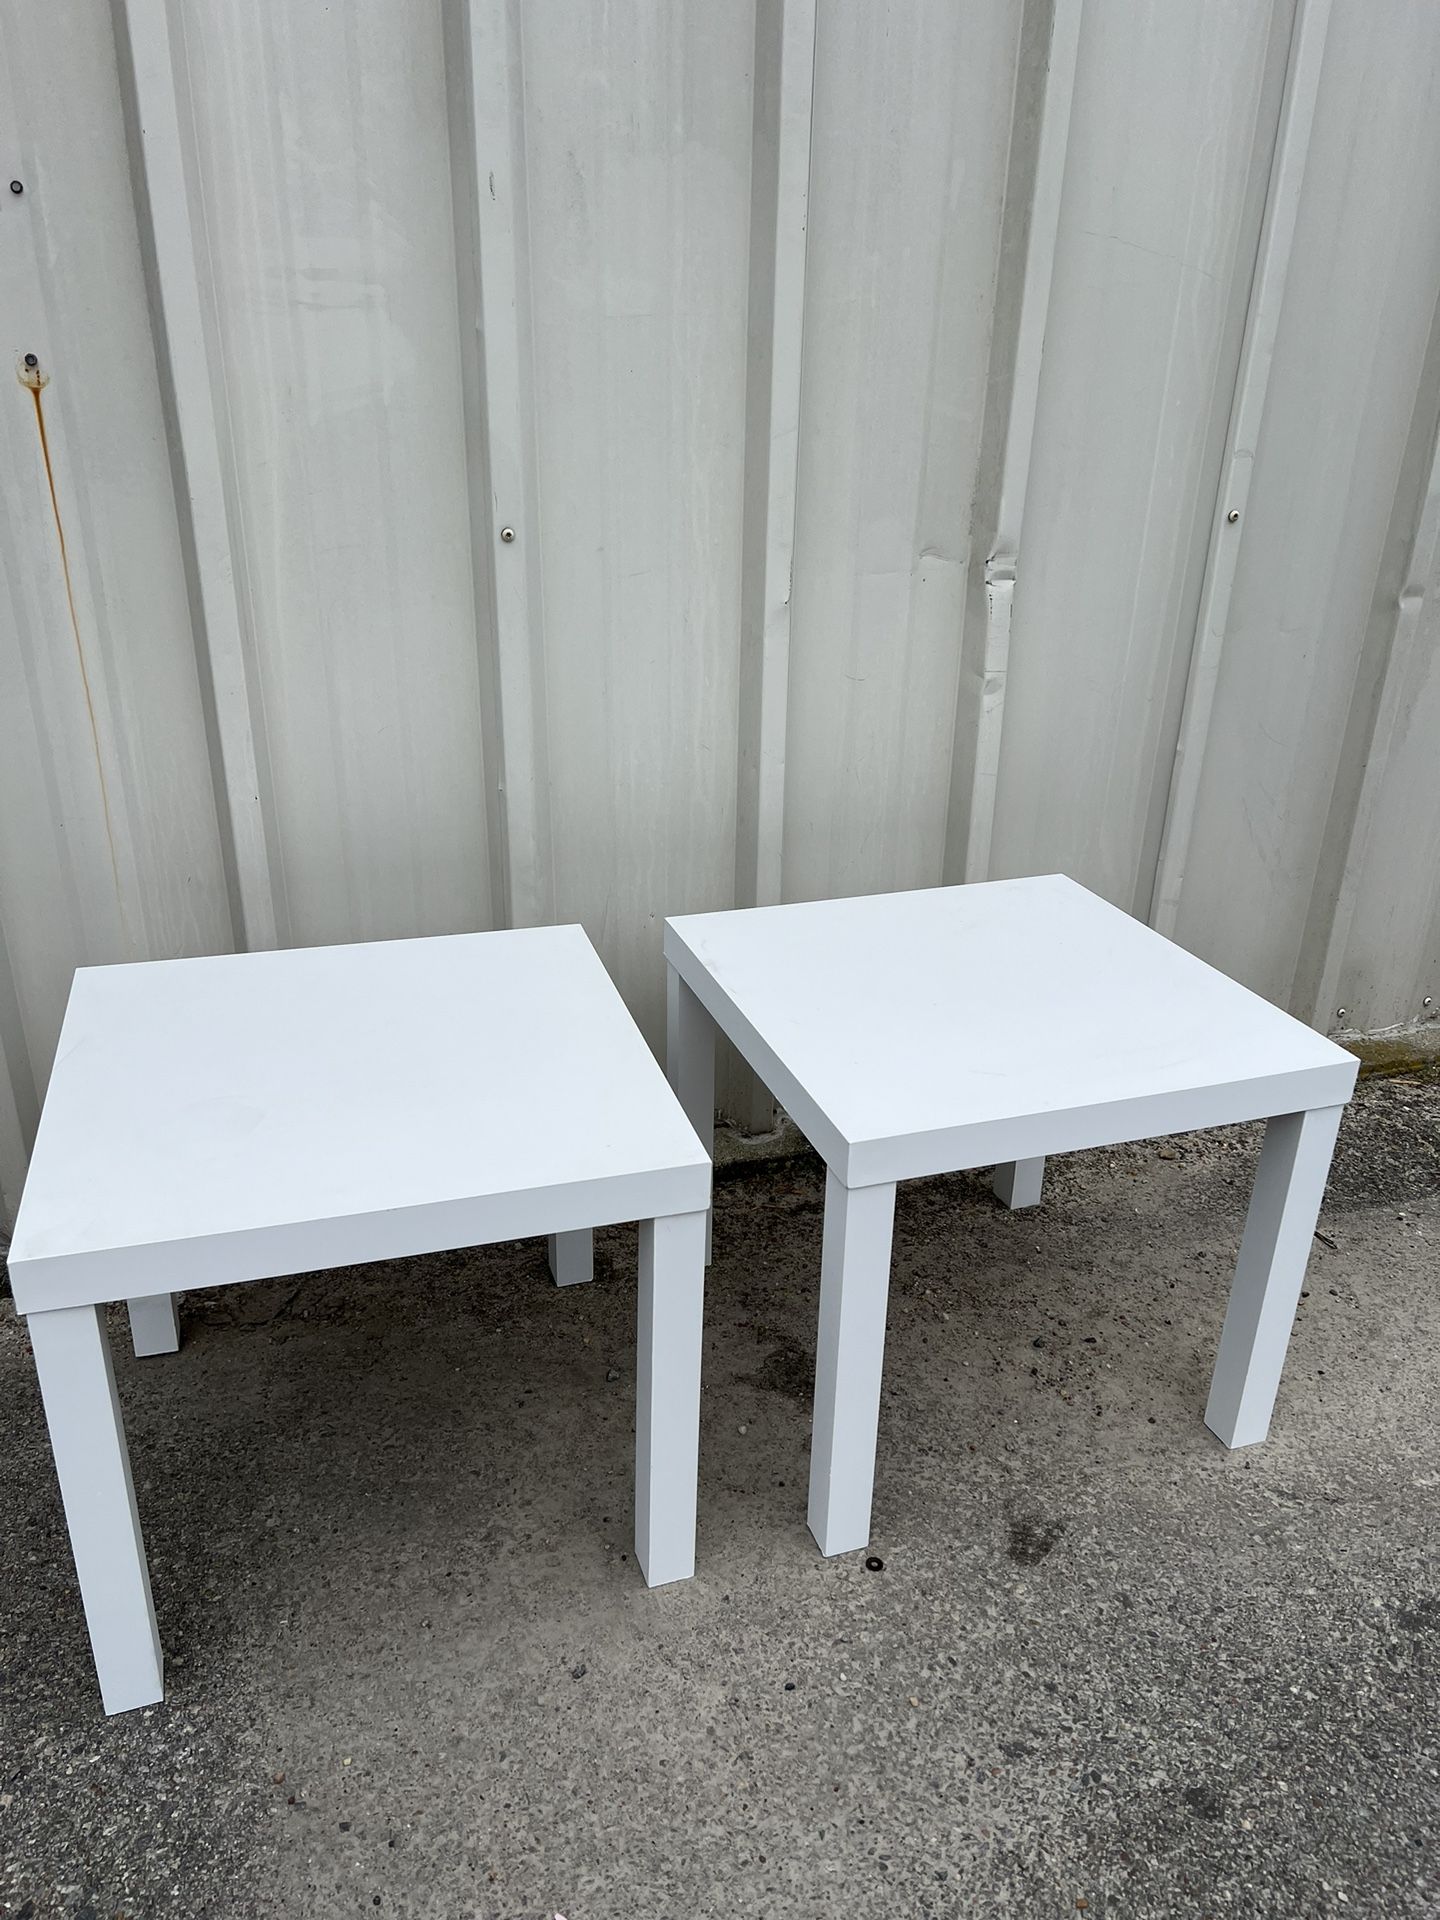 nightstands / end tables